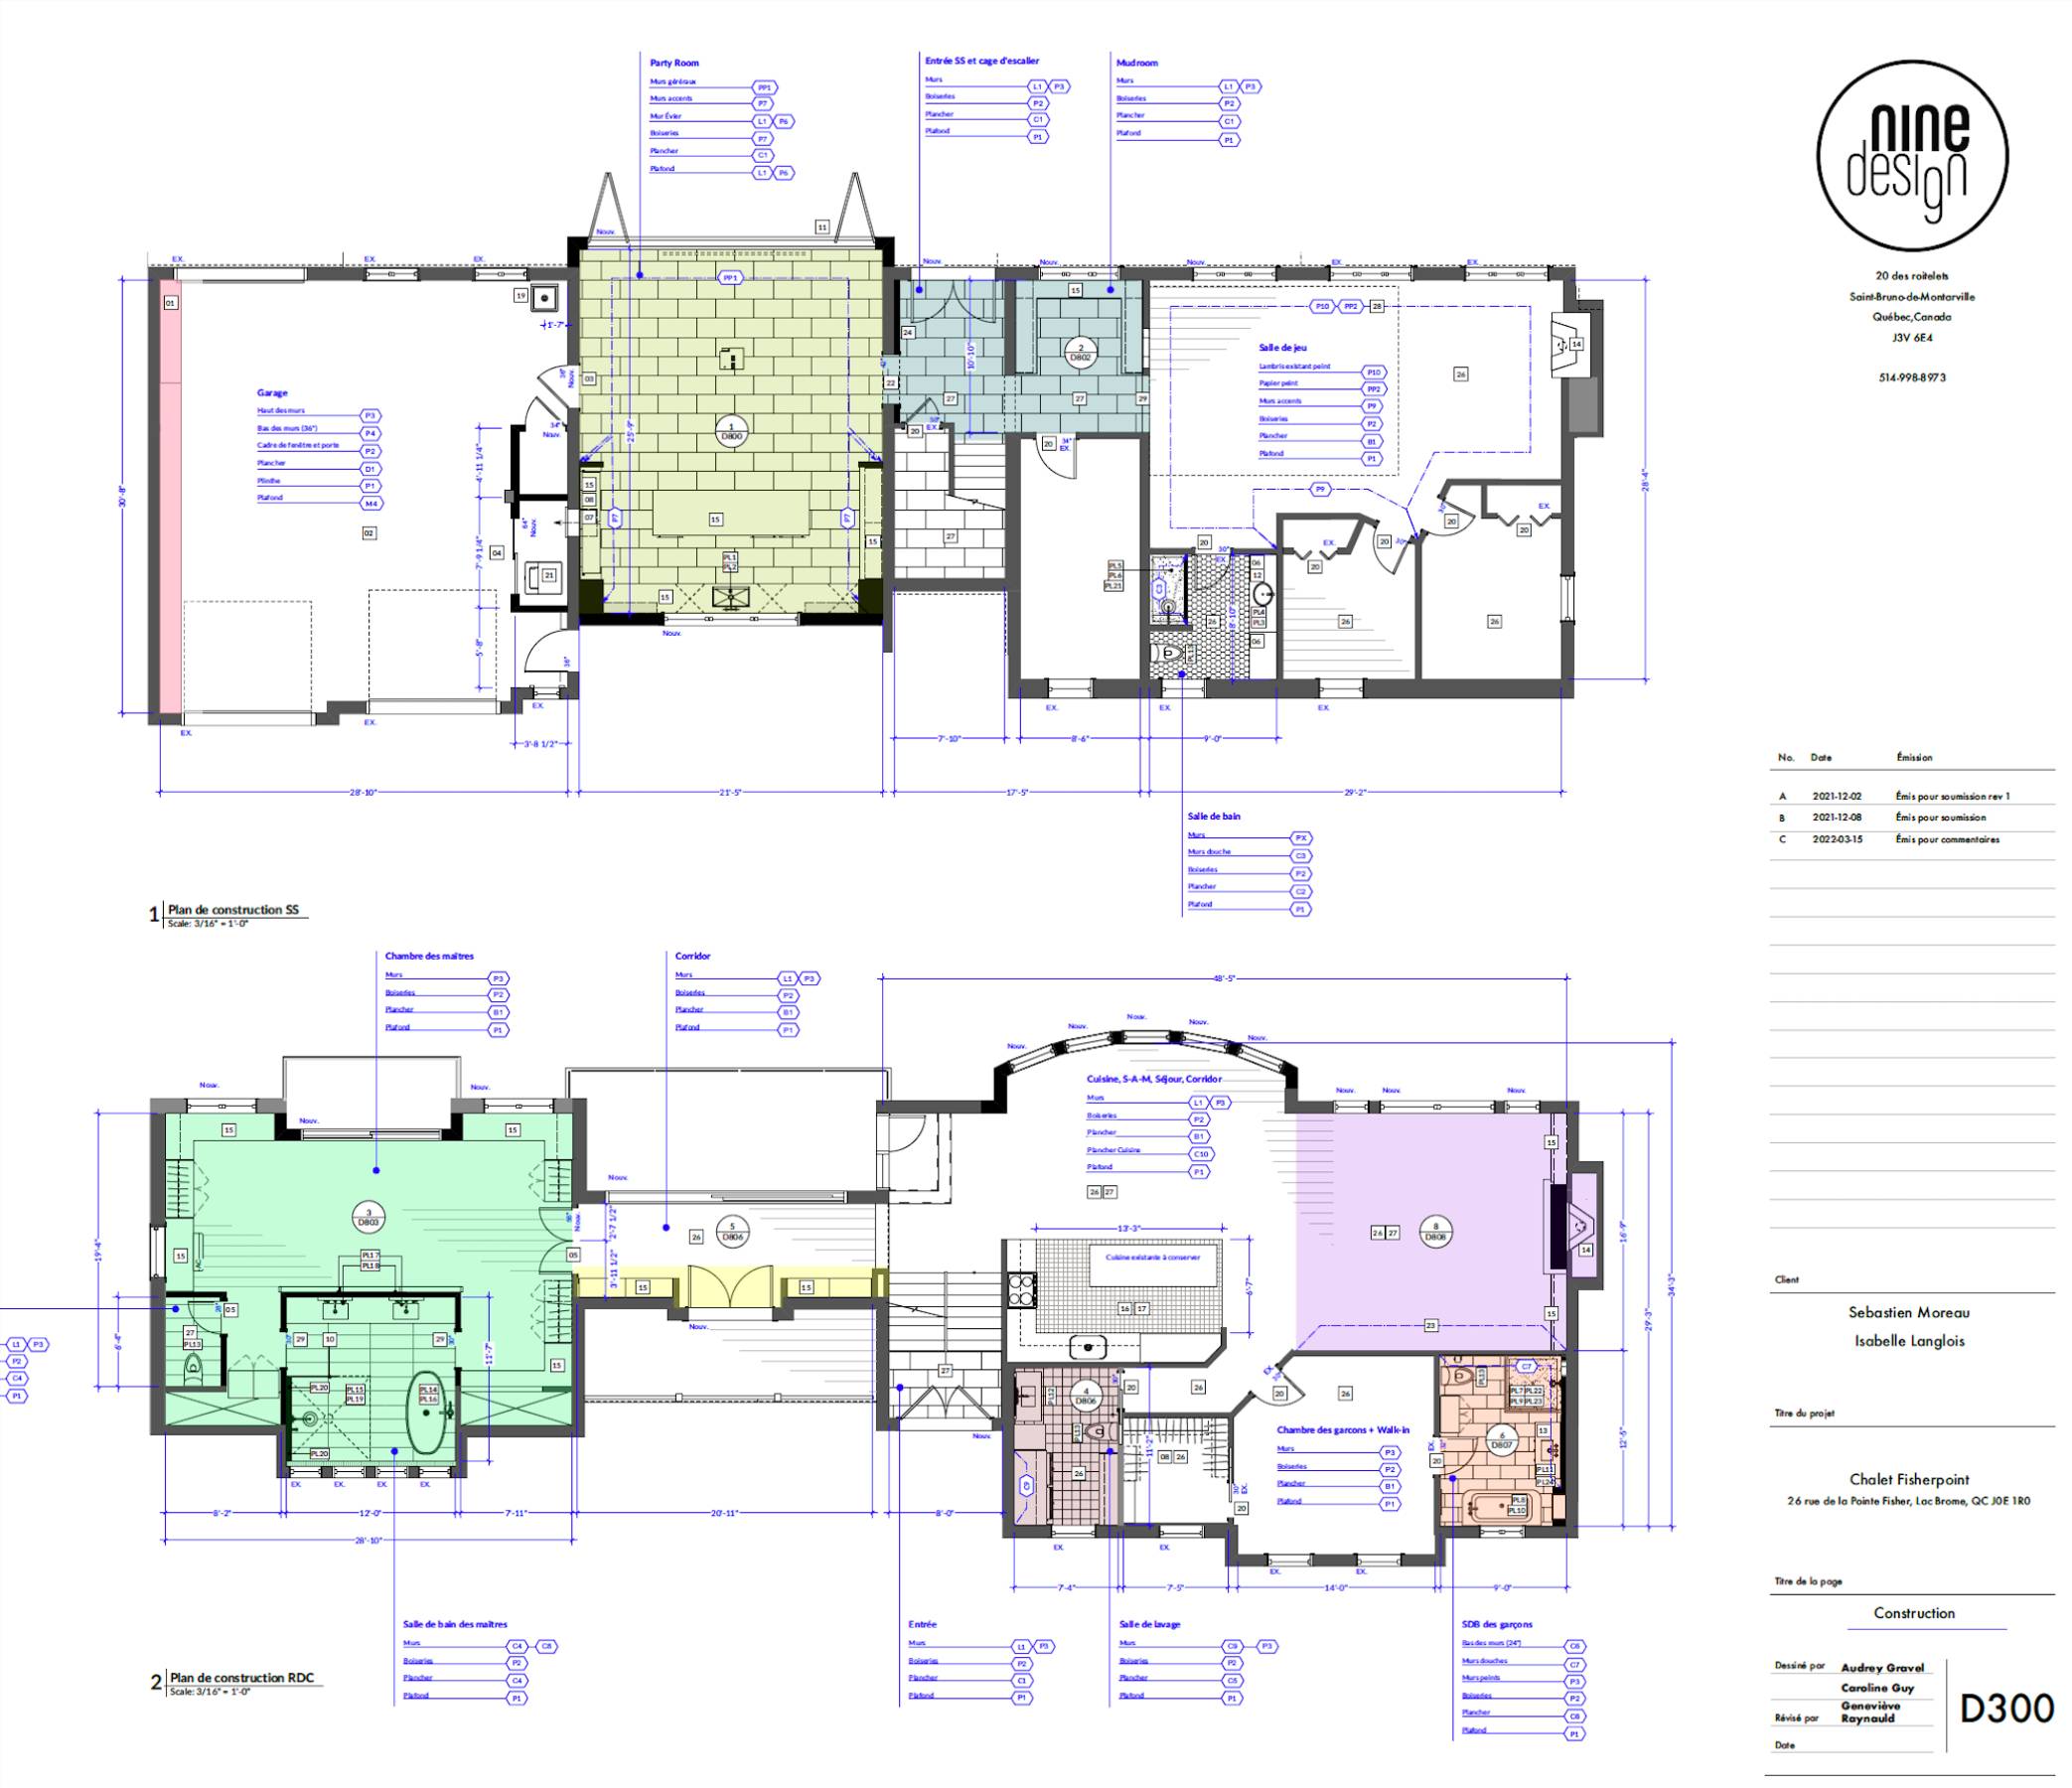 design technology, A Long-Time Vectorworks Designer’s Switch to BIM for Interiors